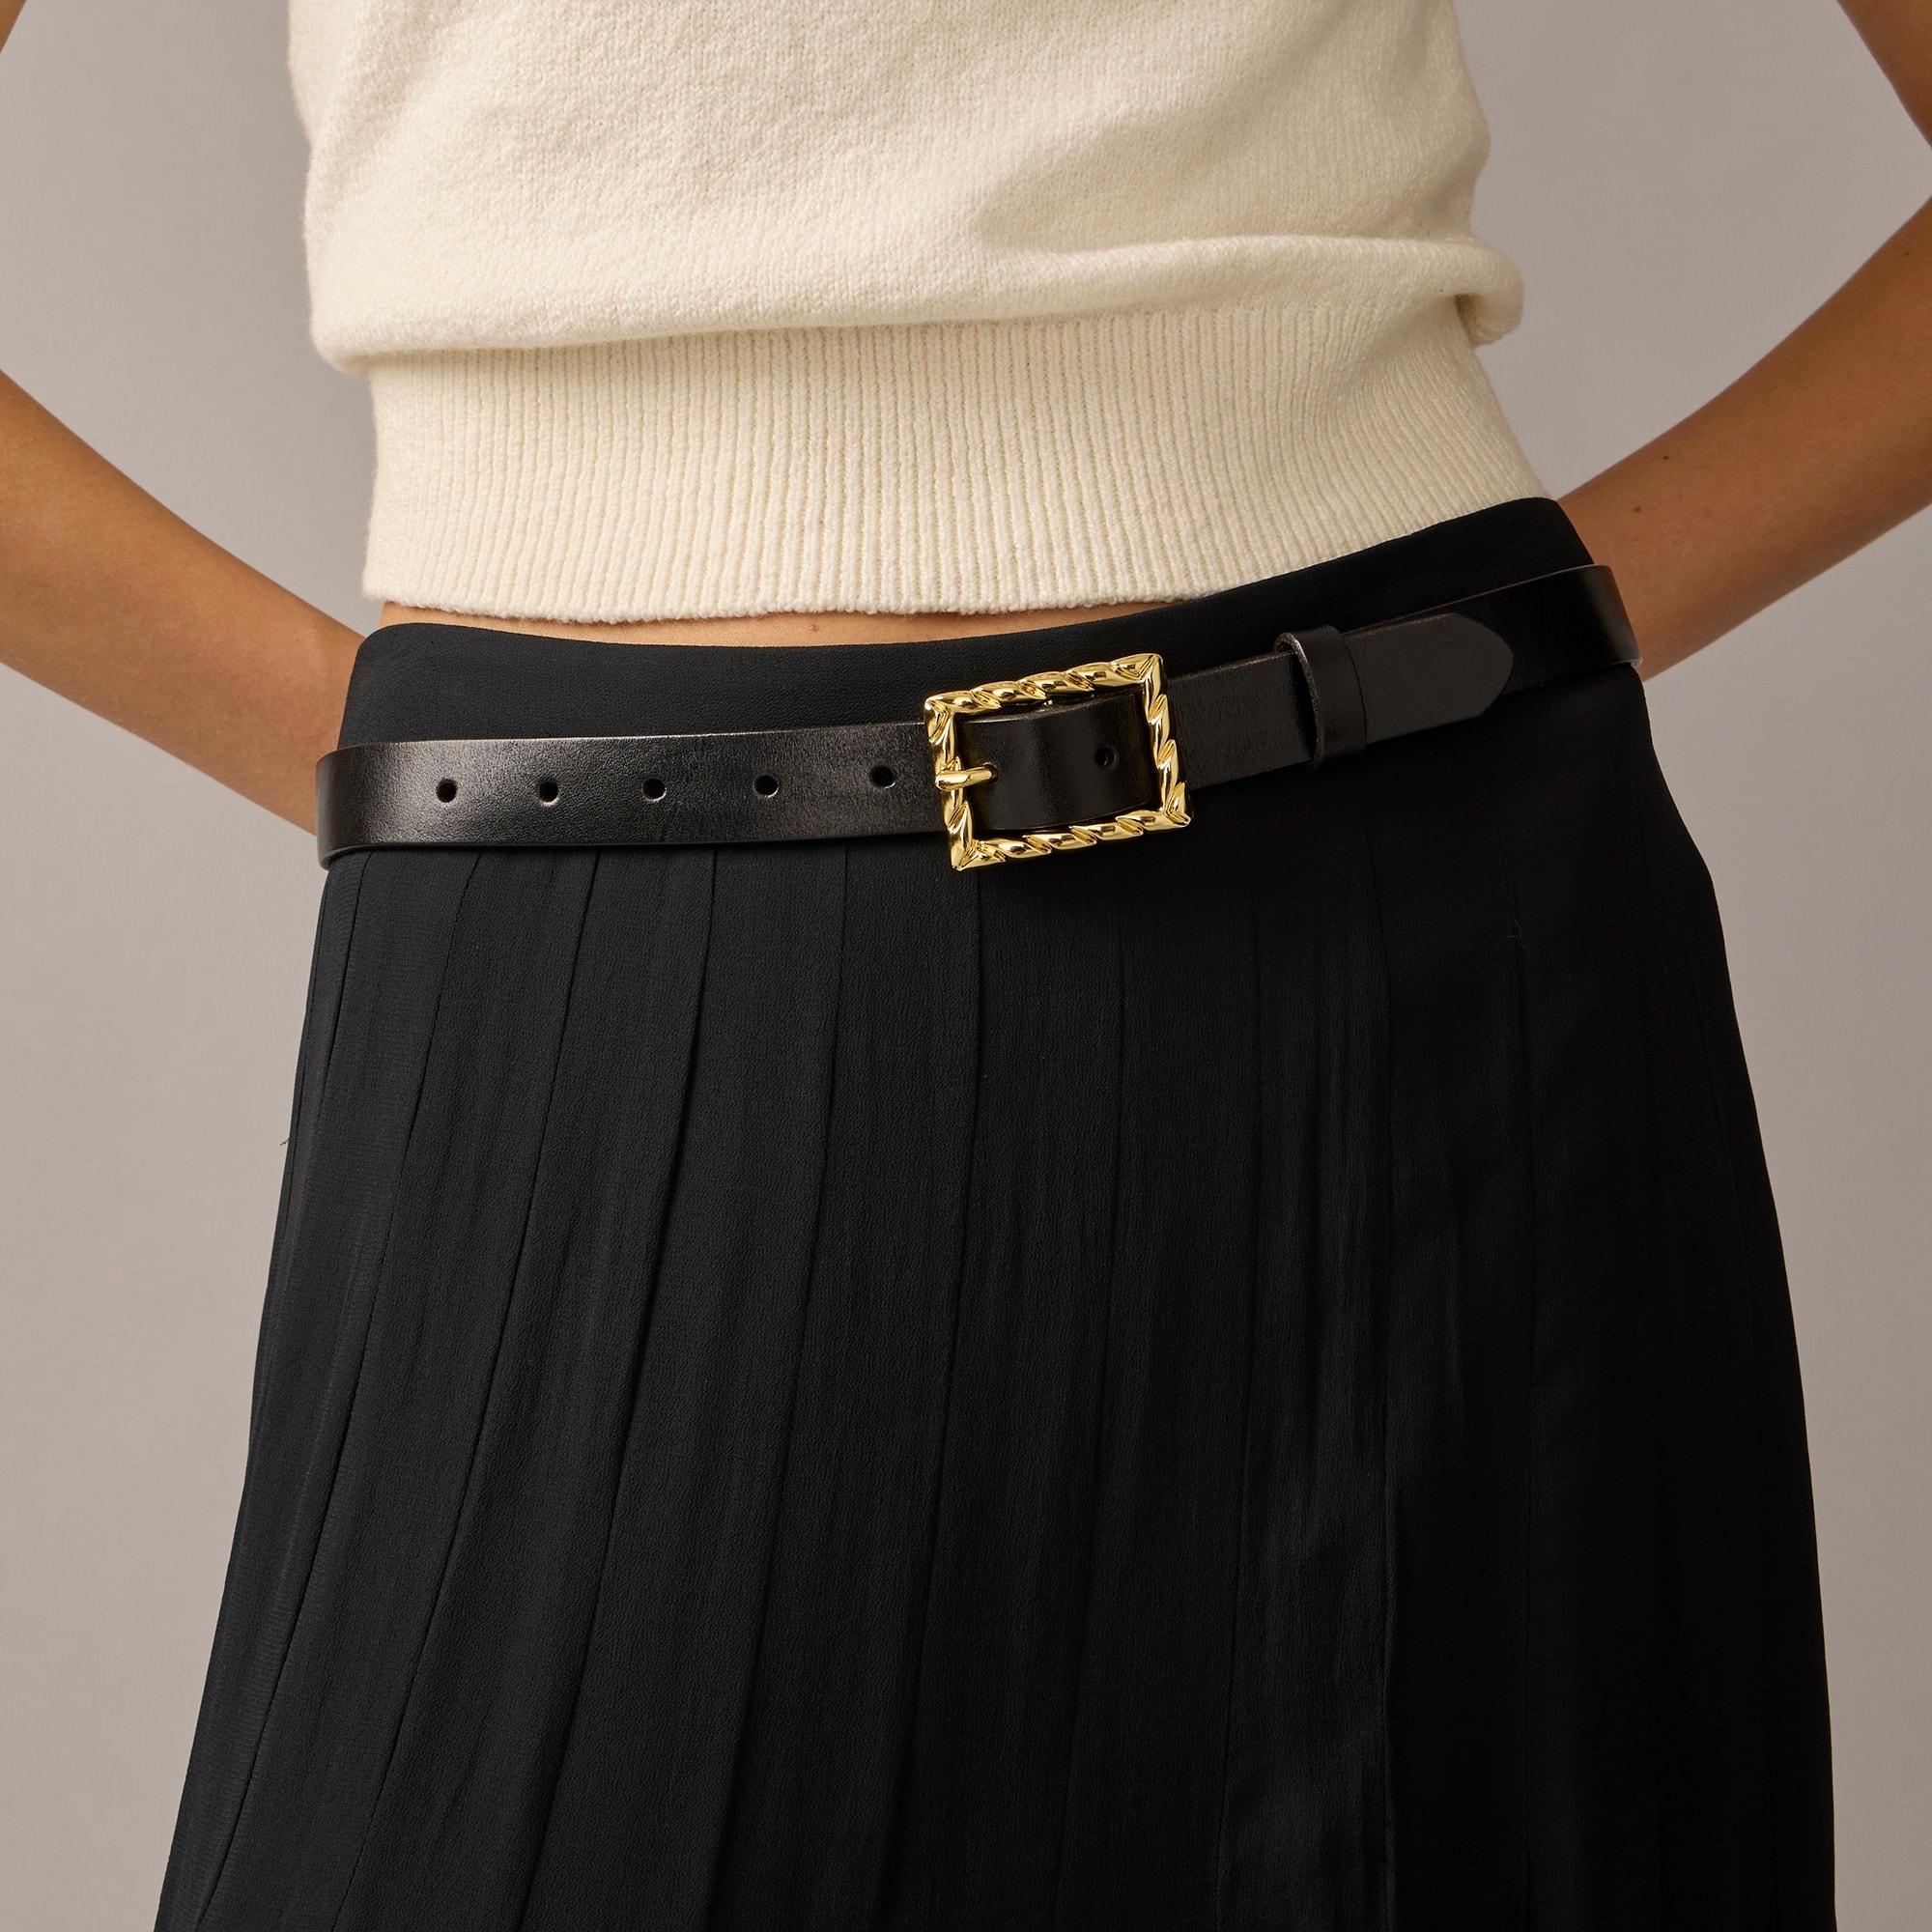 j.crew: classic italian leather belt with twisted buckle for women